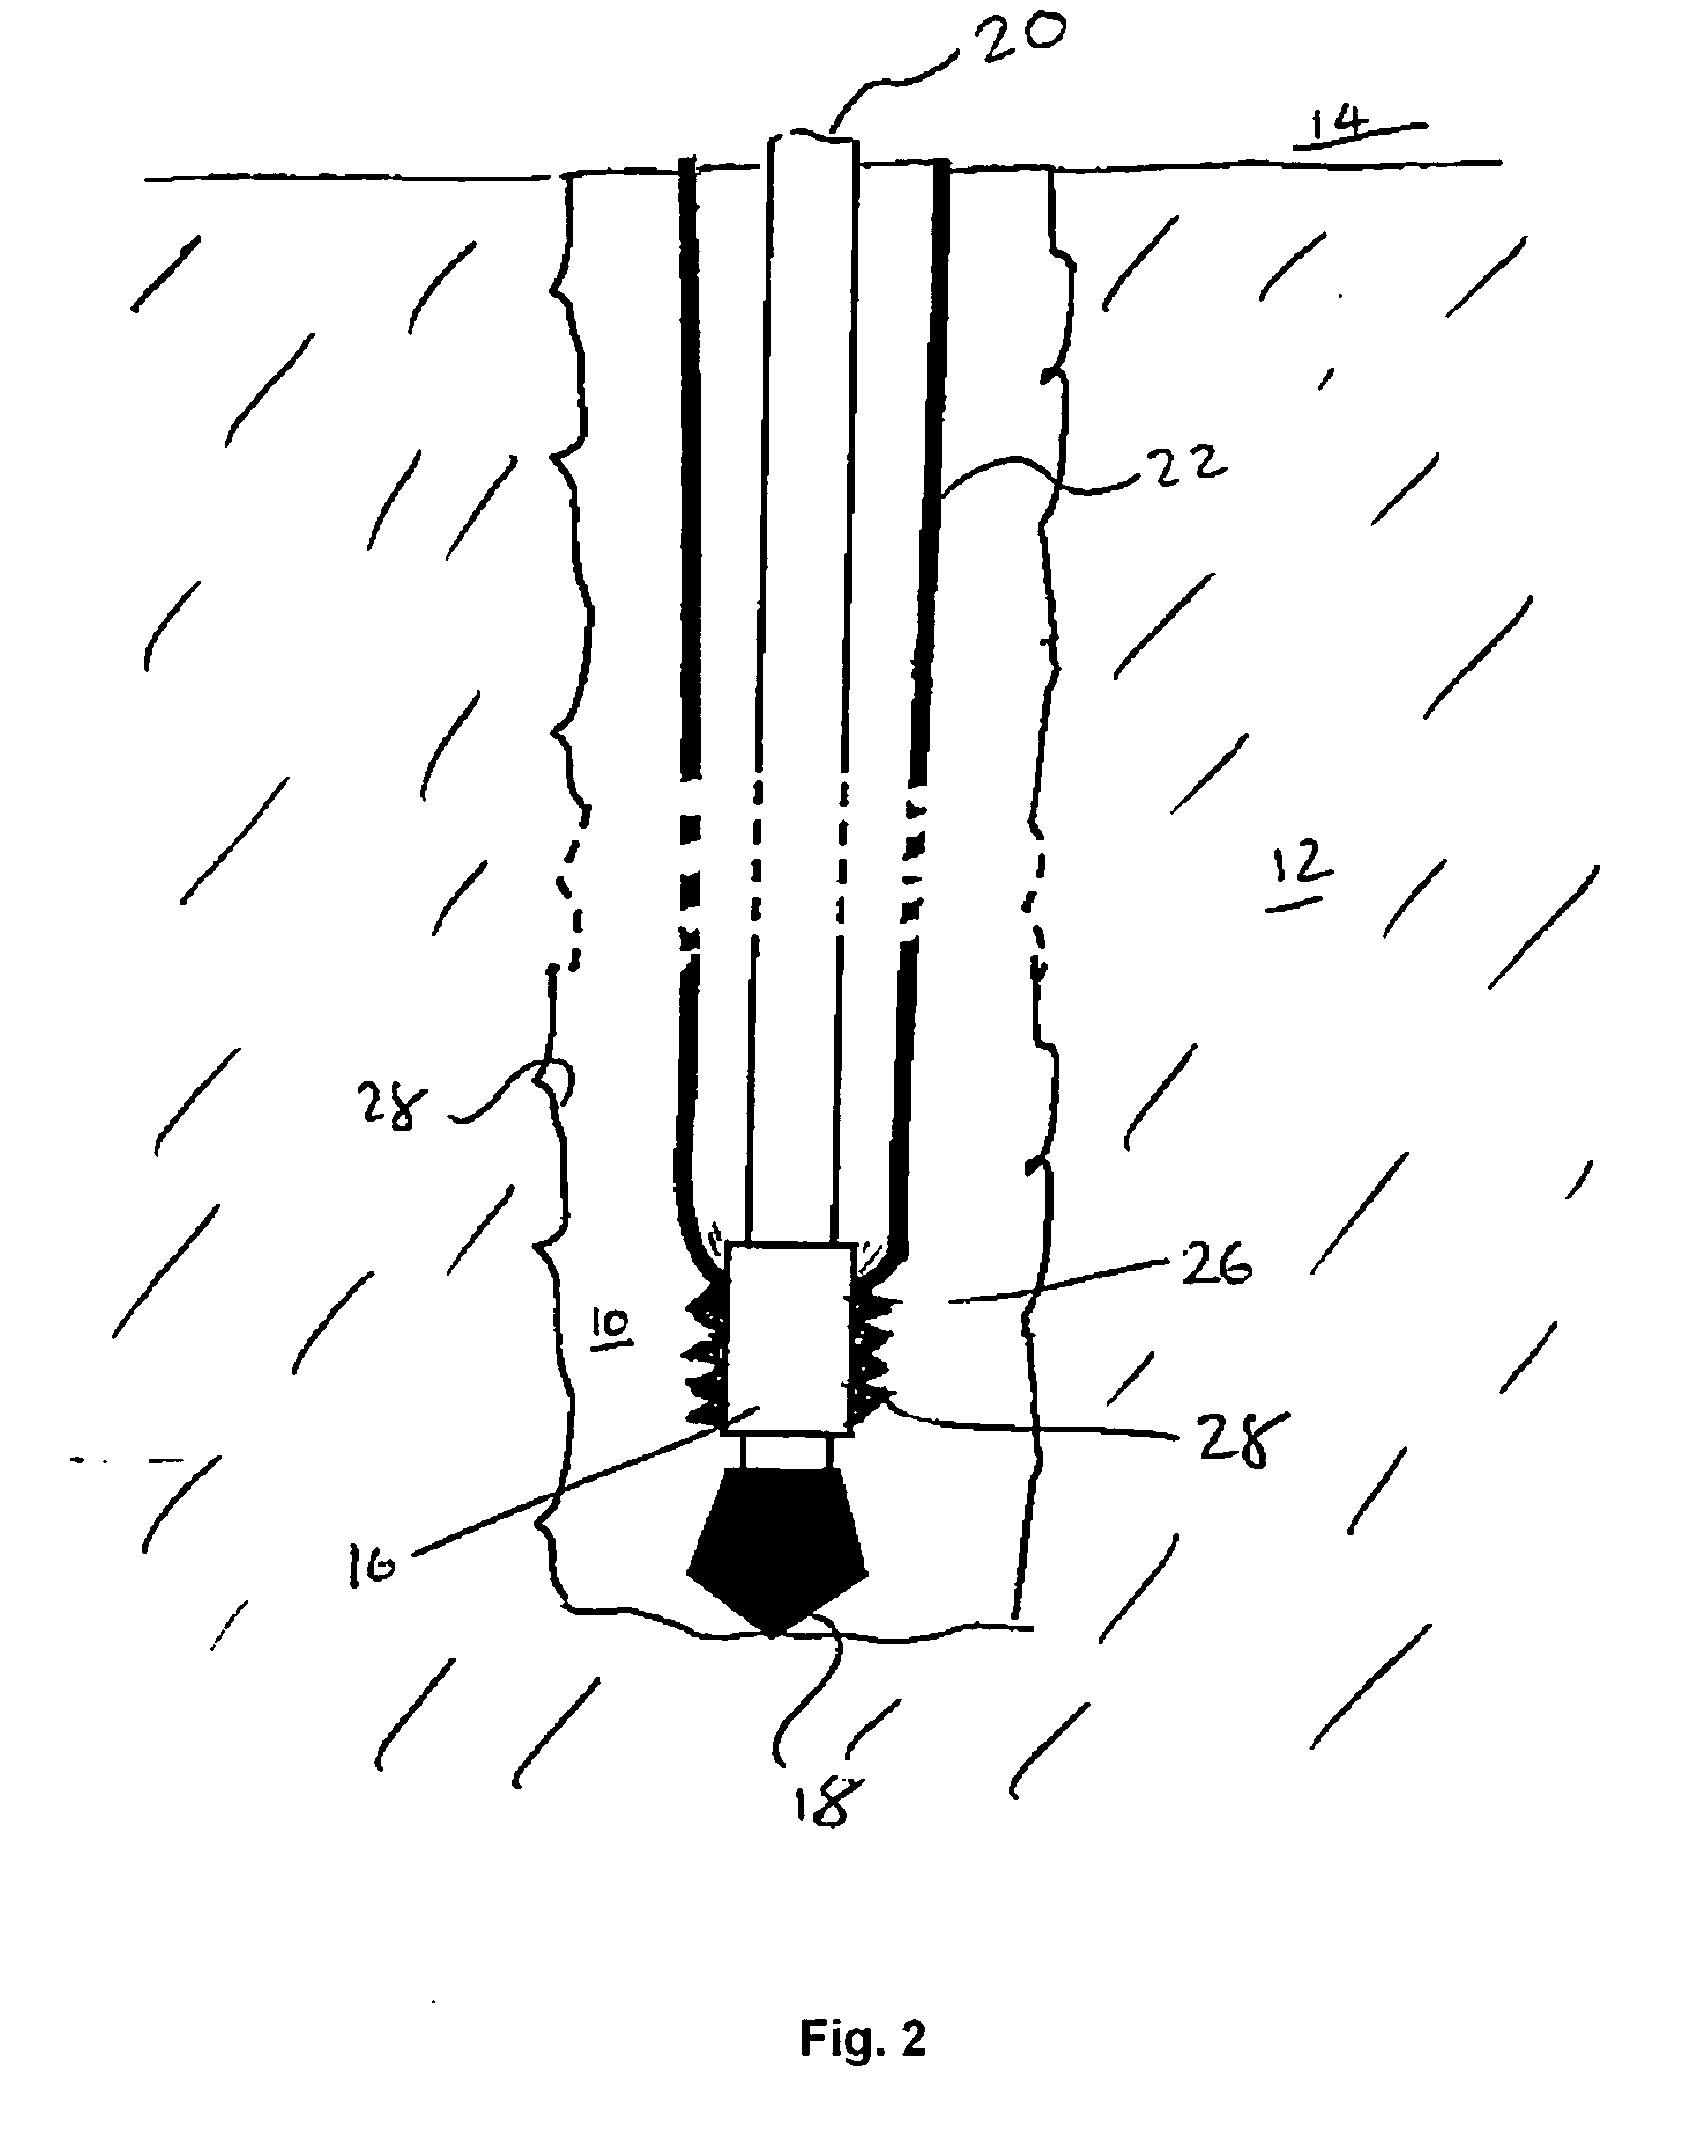 Methods and Apparatus for Well Construction